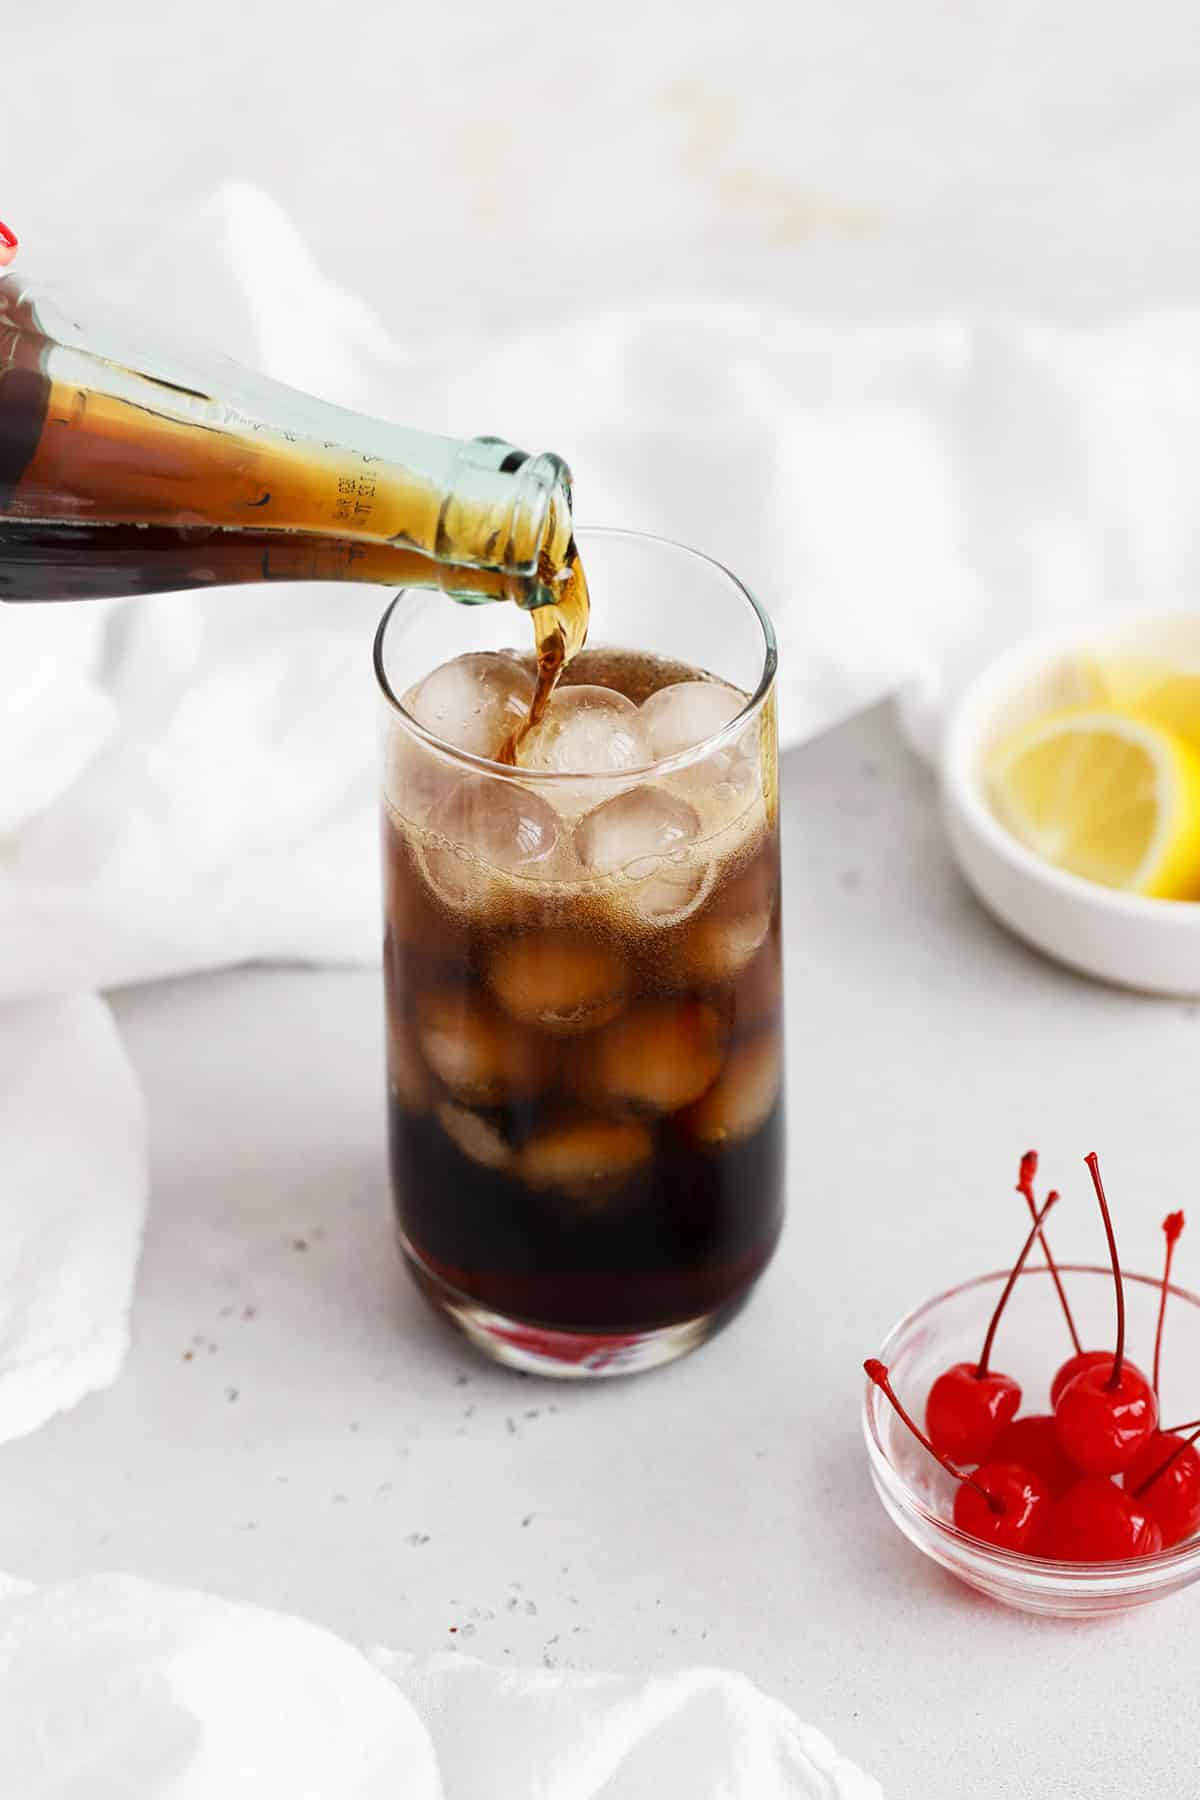 Pouring cola over ice to make a cola mocktail